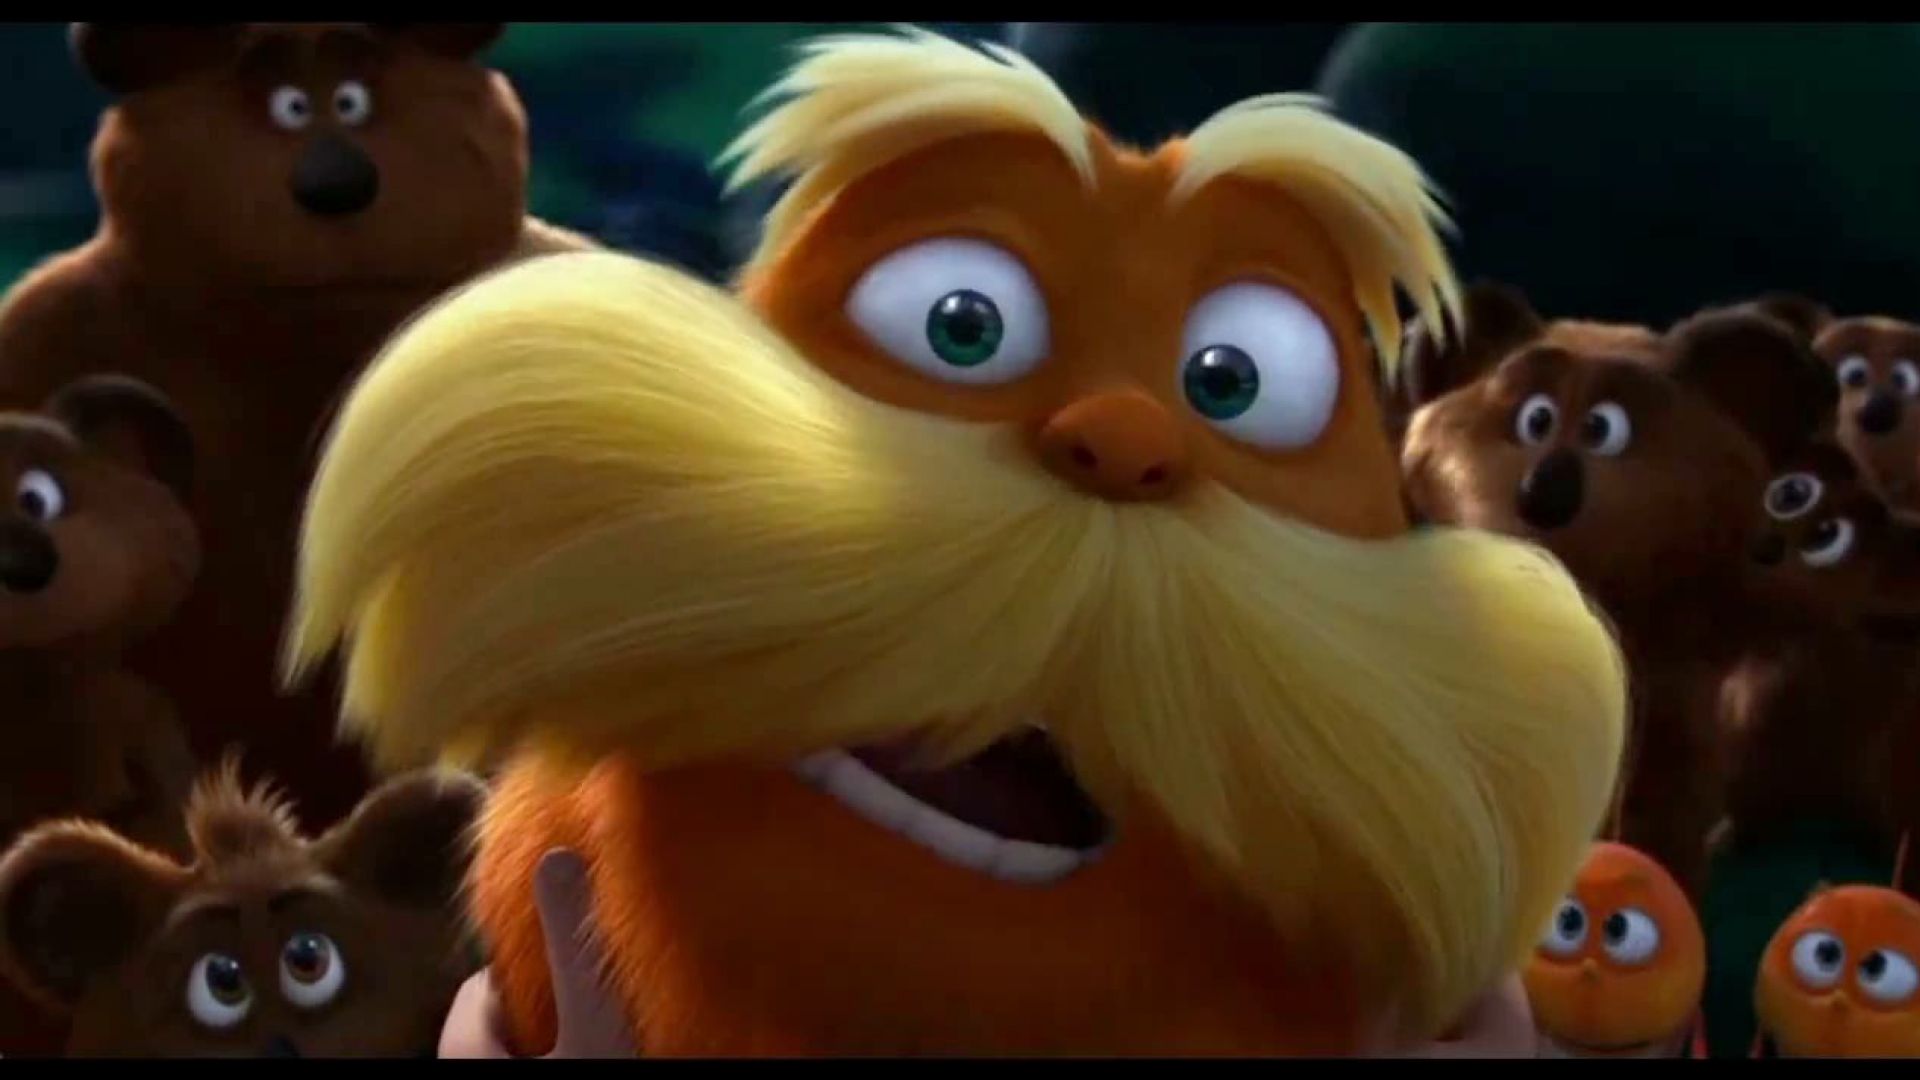 The Lorax tries to reanimate The Once-ler